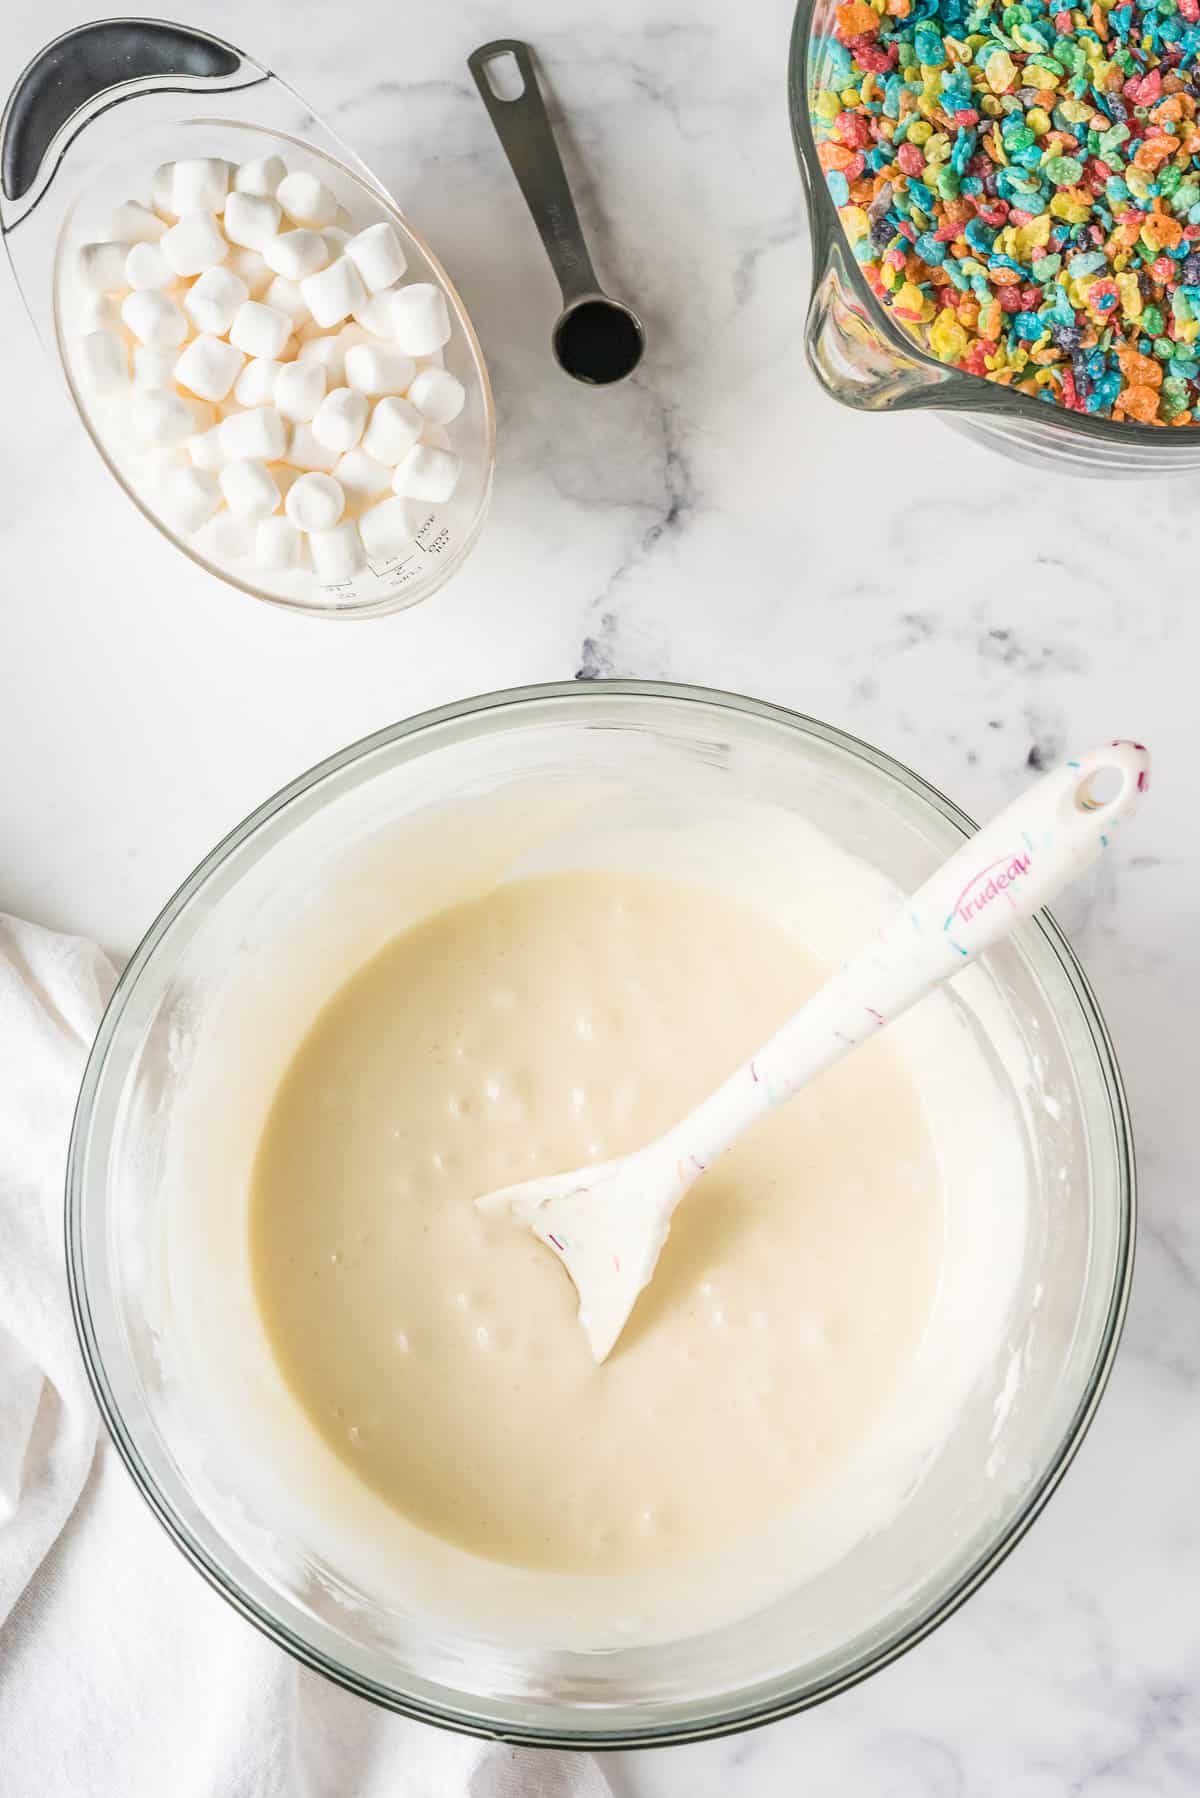 Stir together Melted Butter and Marshmallows until smooth.